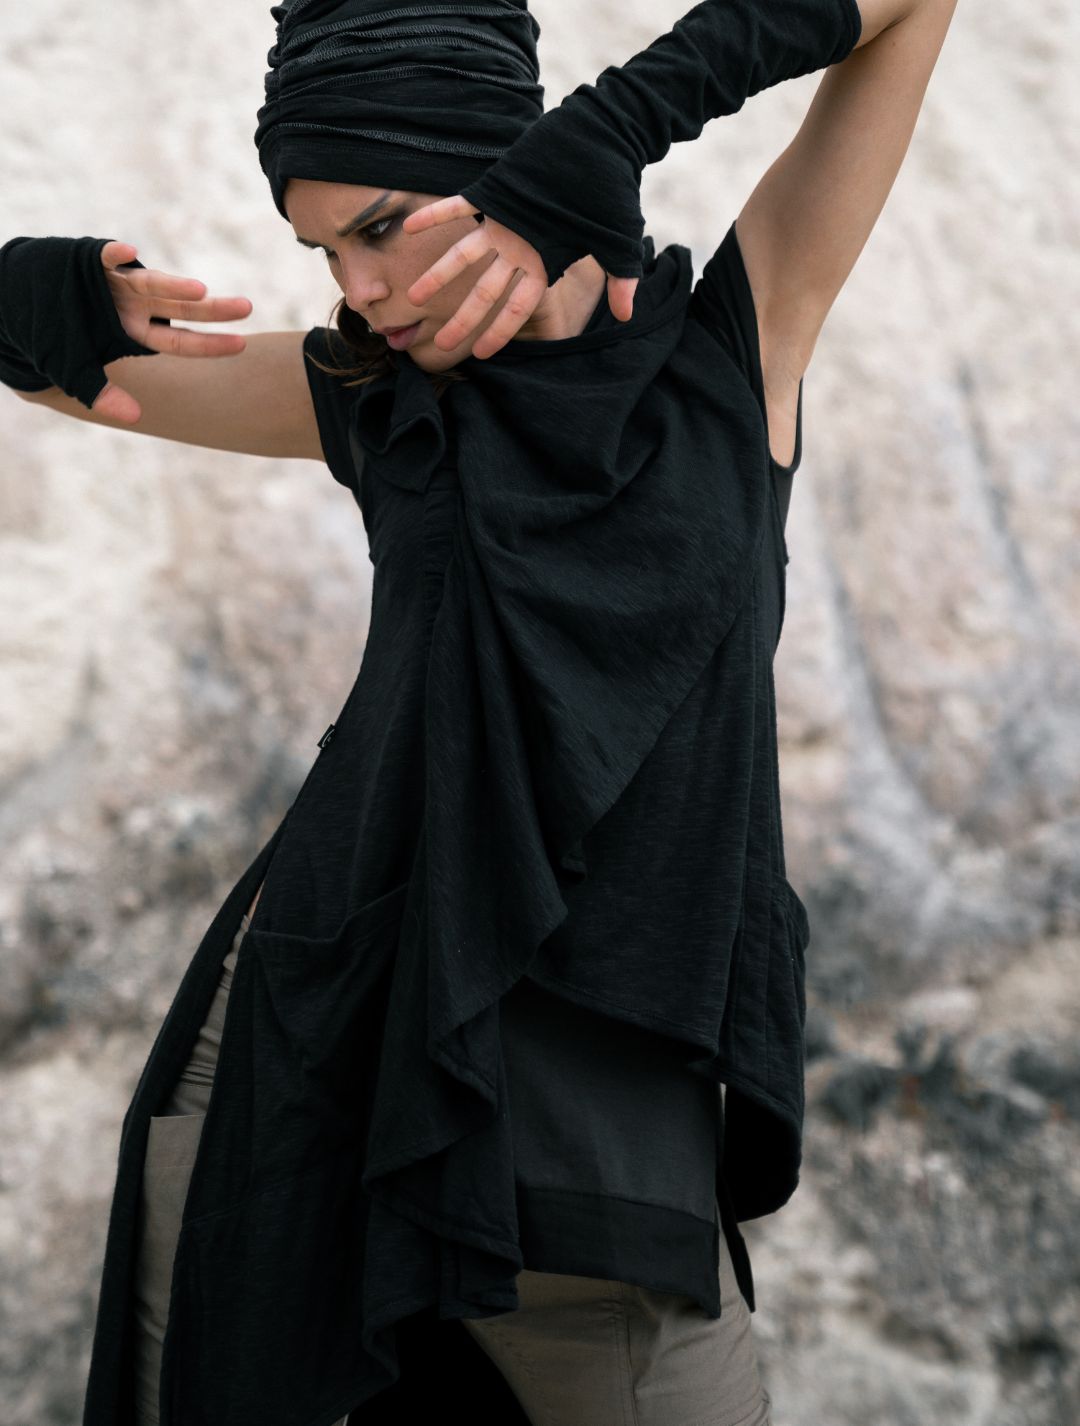 Cyberpunk Clothing - Psylo's Cutting-Edge Collection Tagged Women - Psylo